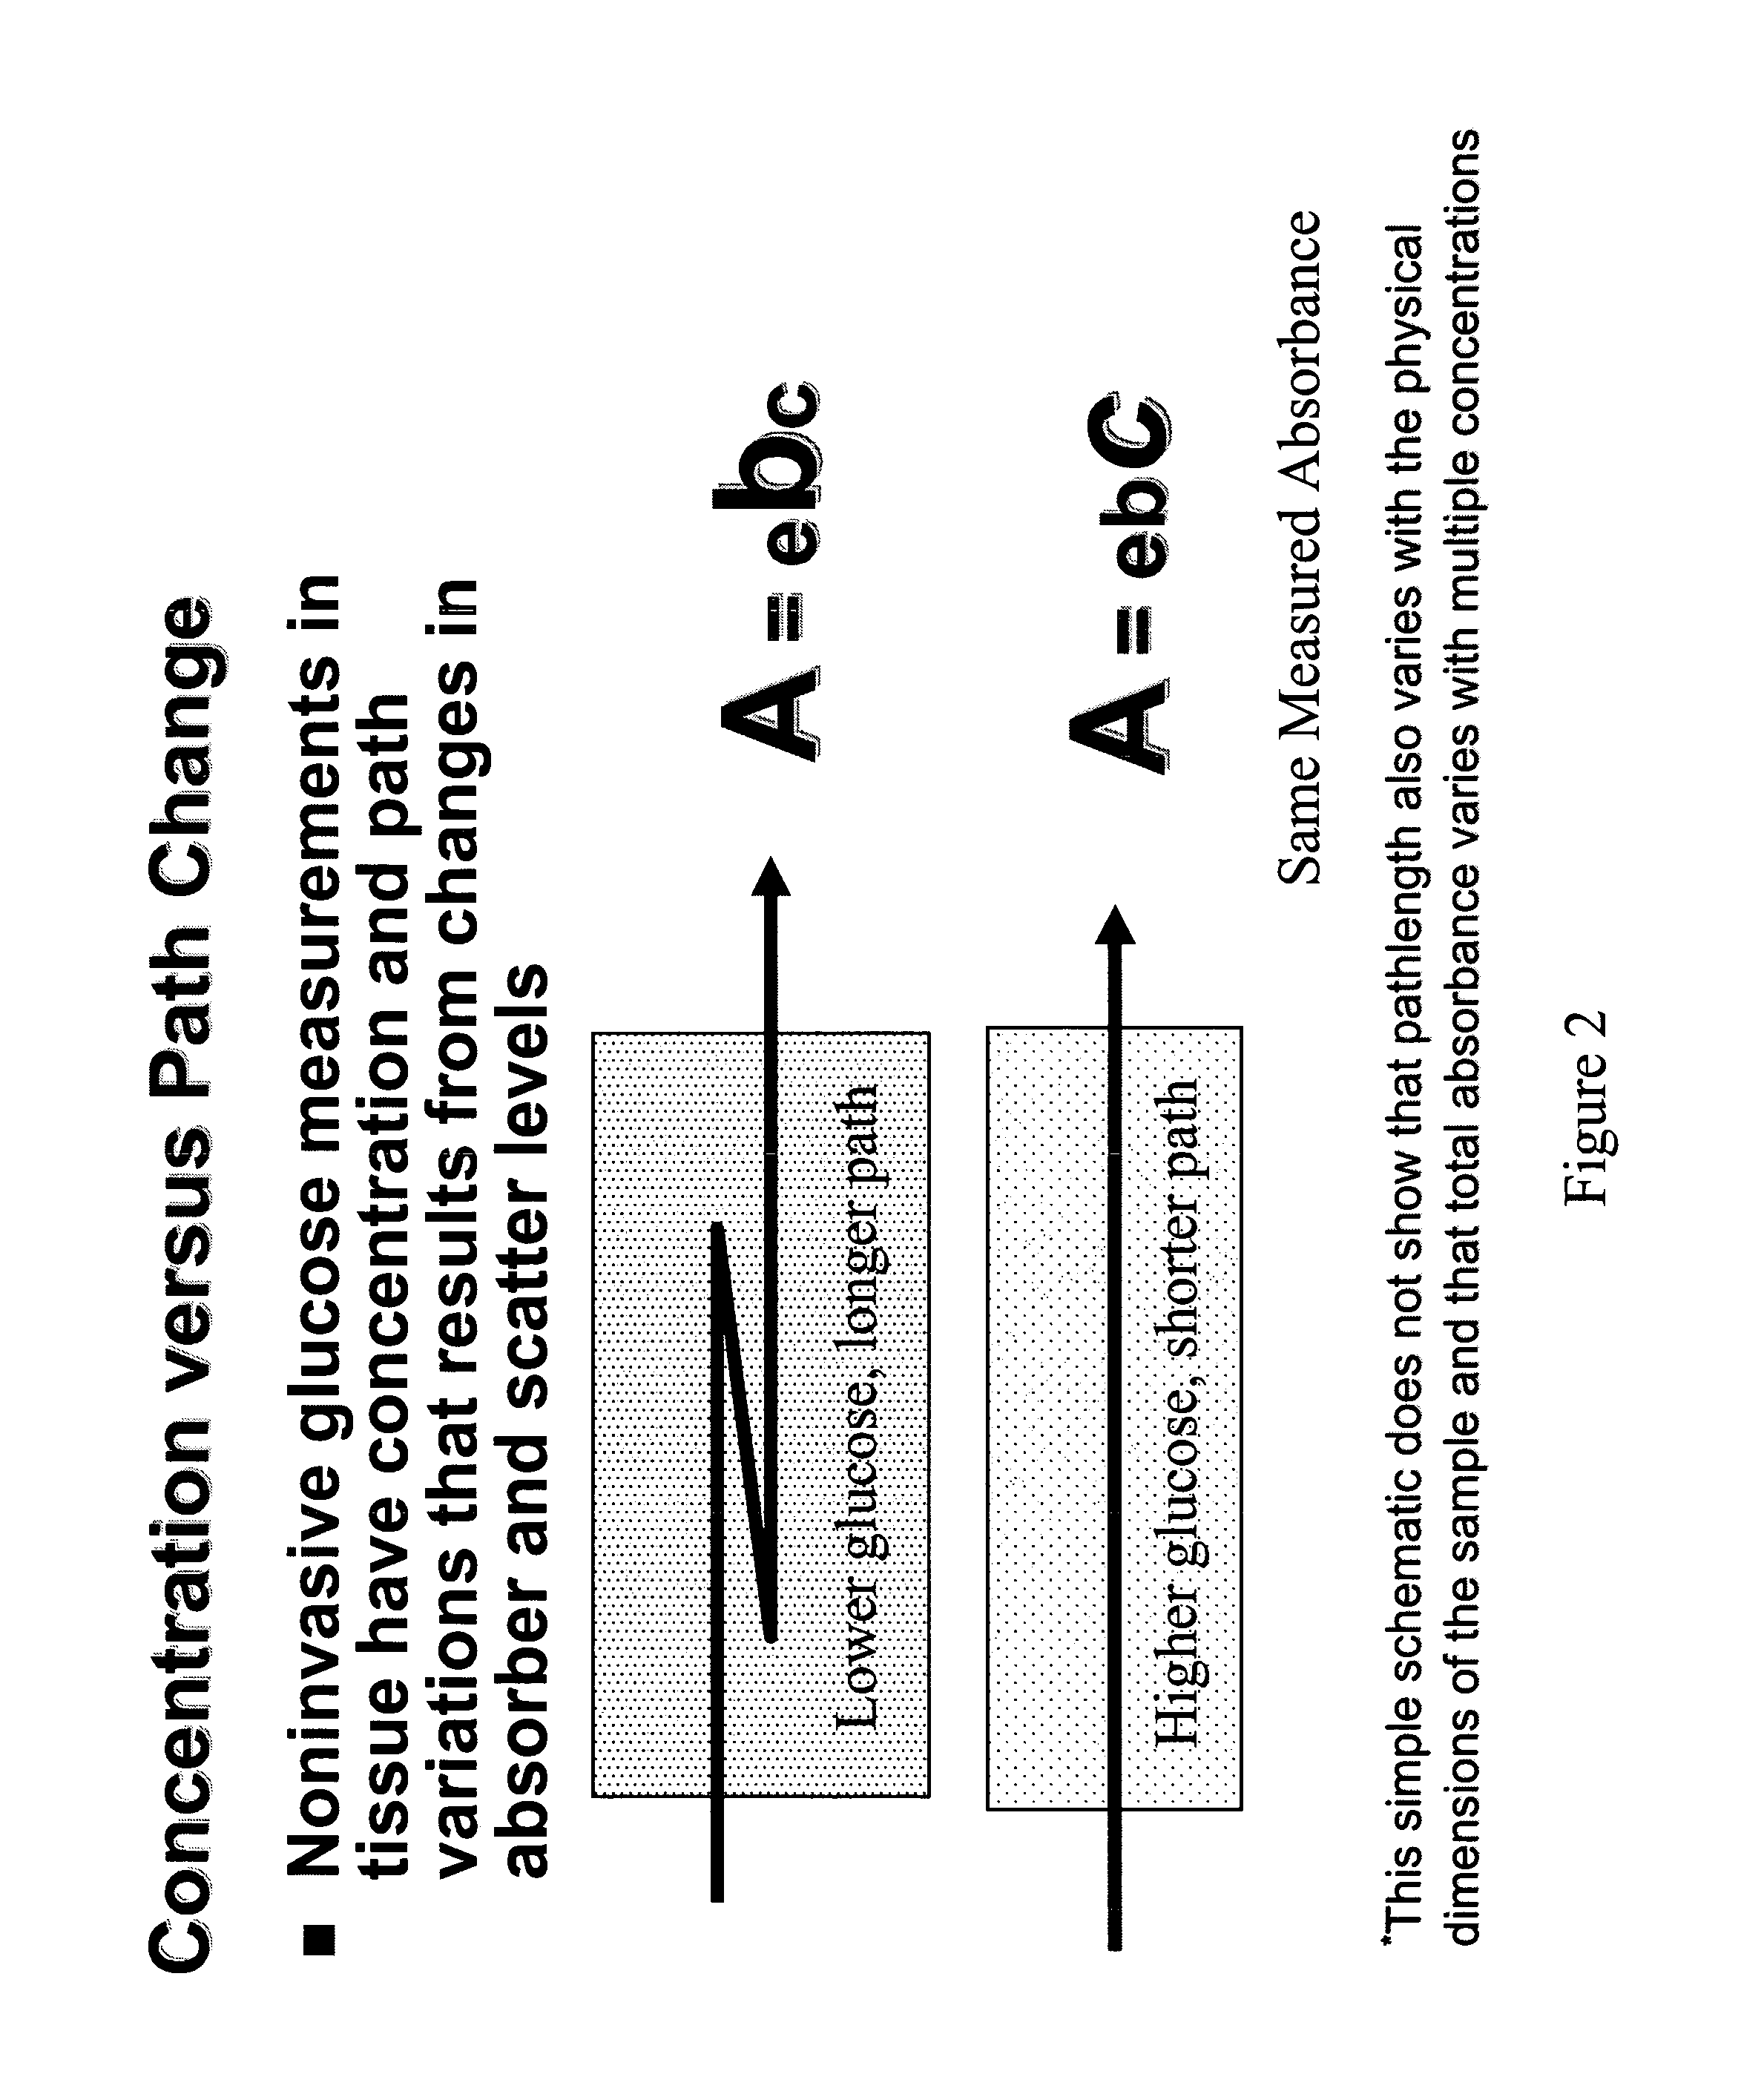 Methods and apparatuses for noninvasive determinations of analytes